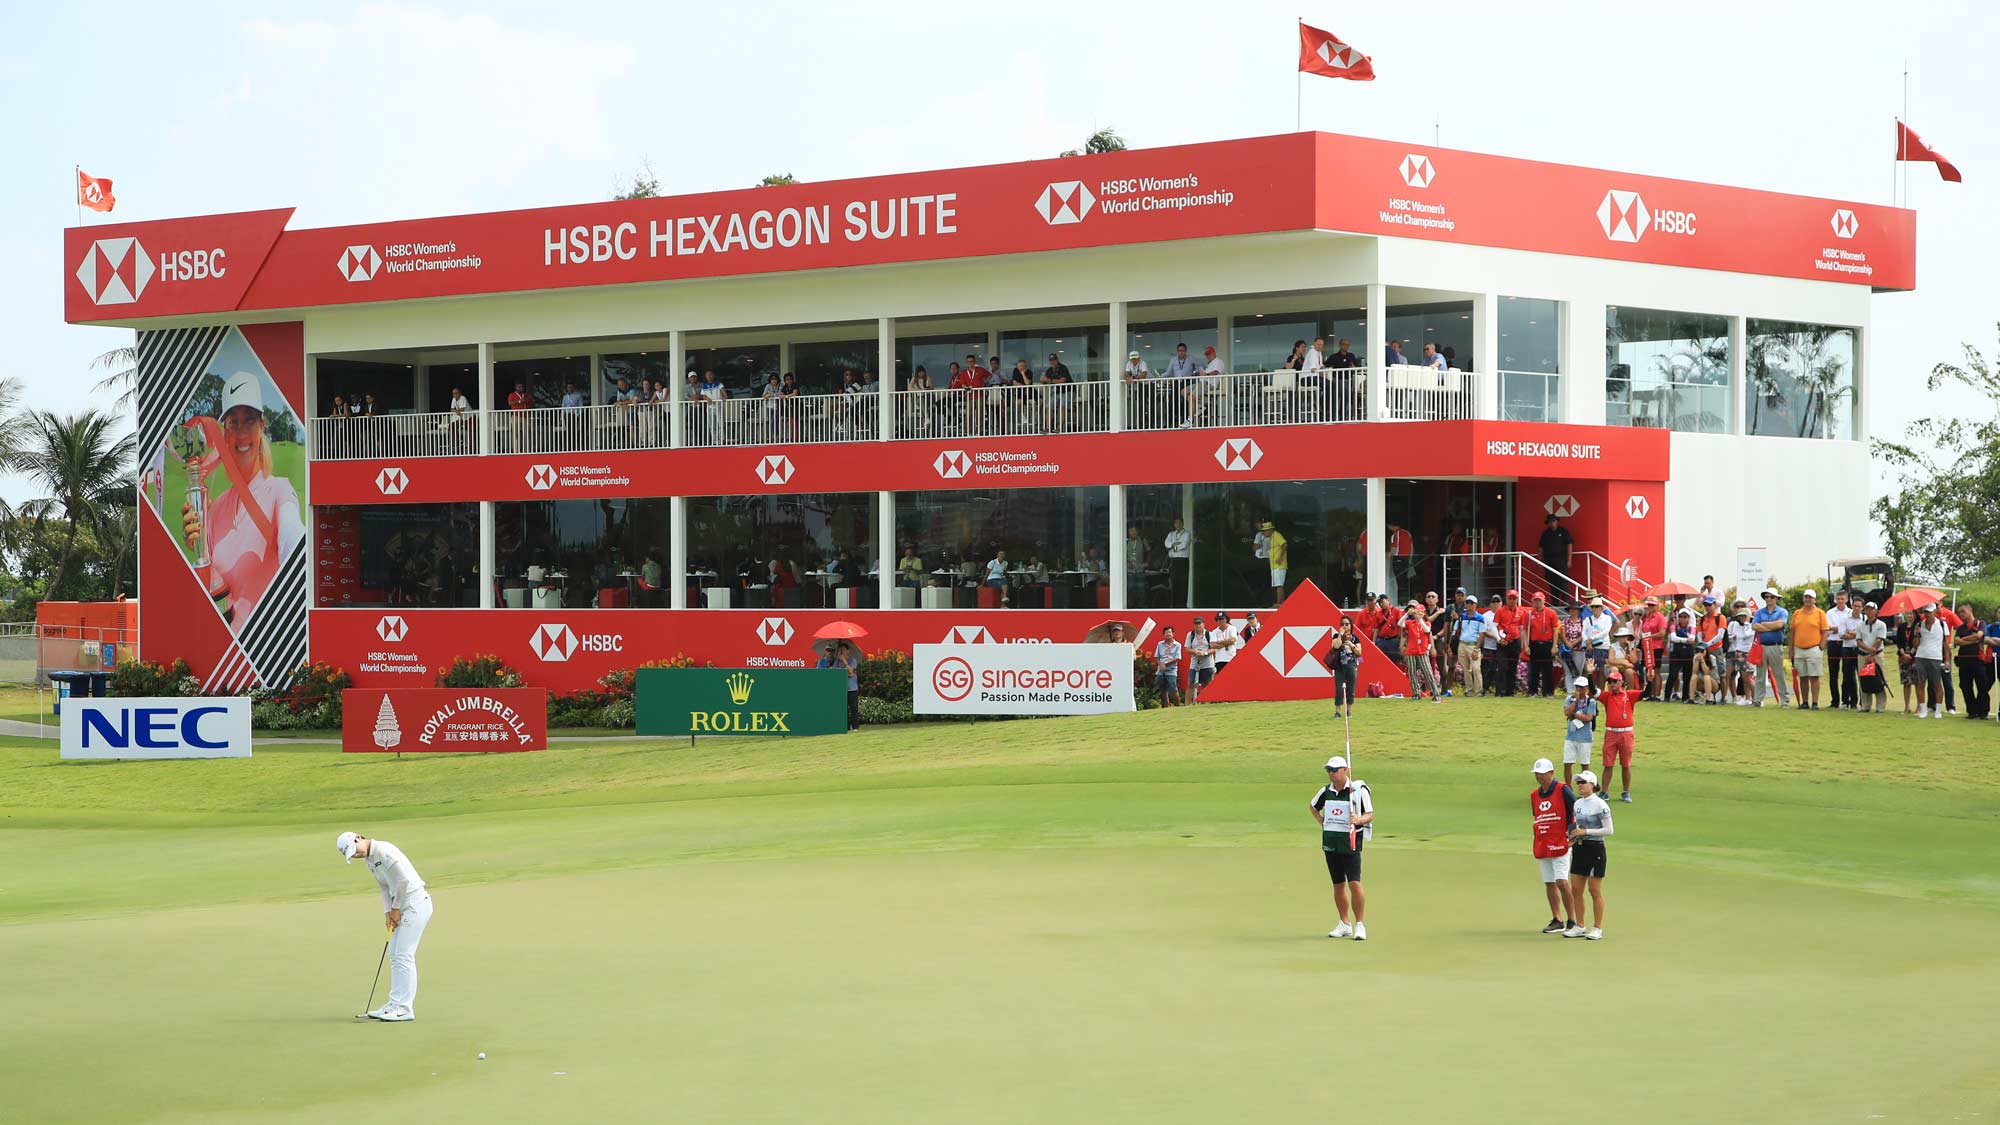 Sung Hyun Park of South Korea putts on the 18th green during the first round of the HSBC Women's World Championship at Sentosa Golf Club on February 28, 2019 in Singapore.